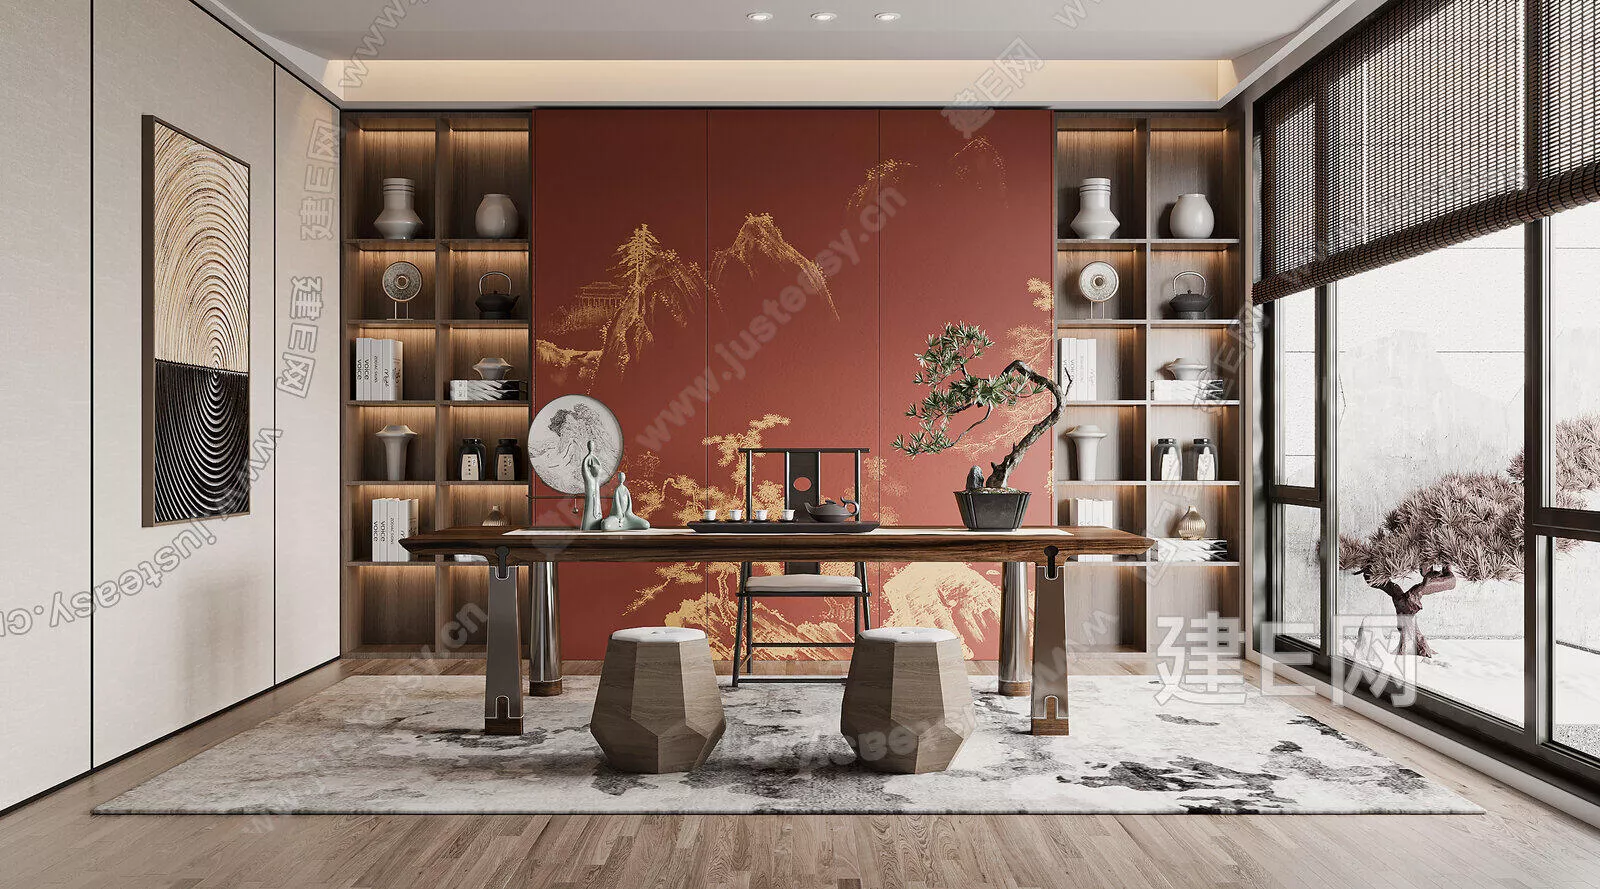 CHINESE TEAROOM - SKETCHUP 3D SCENE - ENSCAPE - 102713513